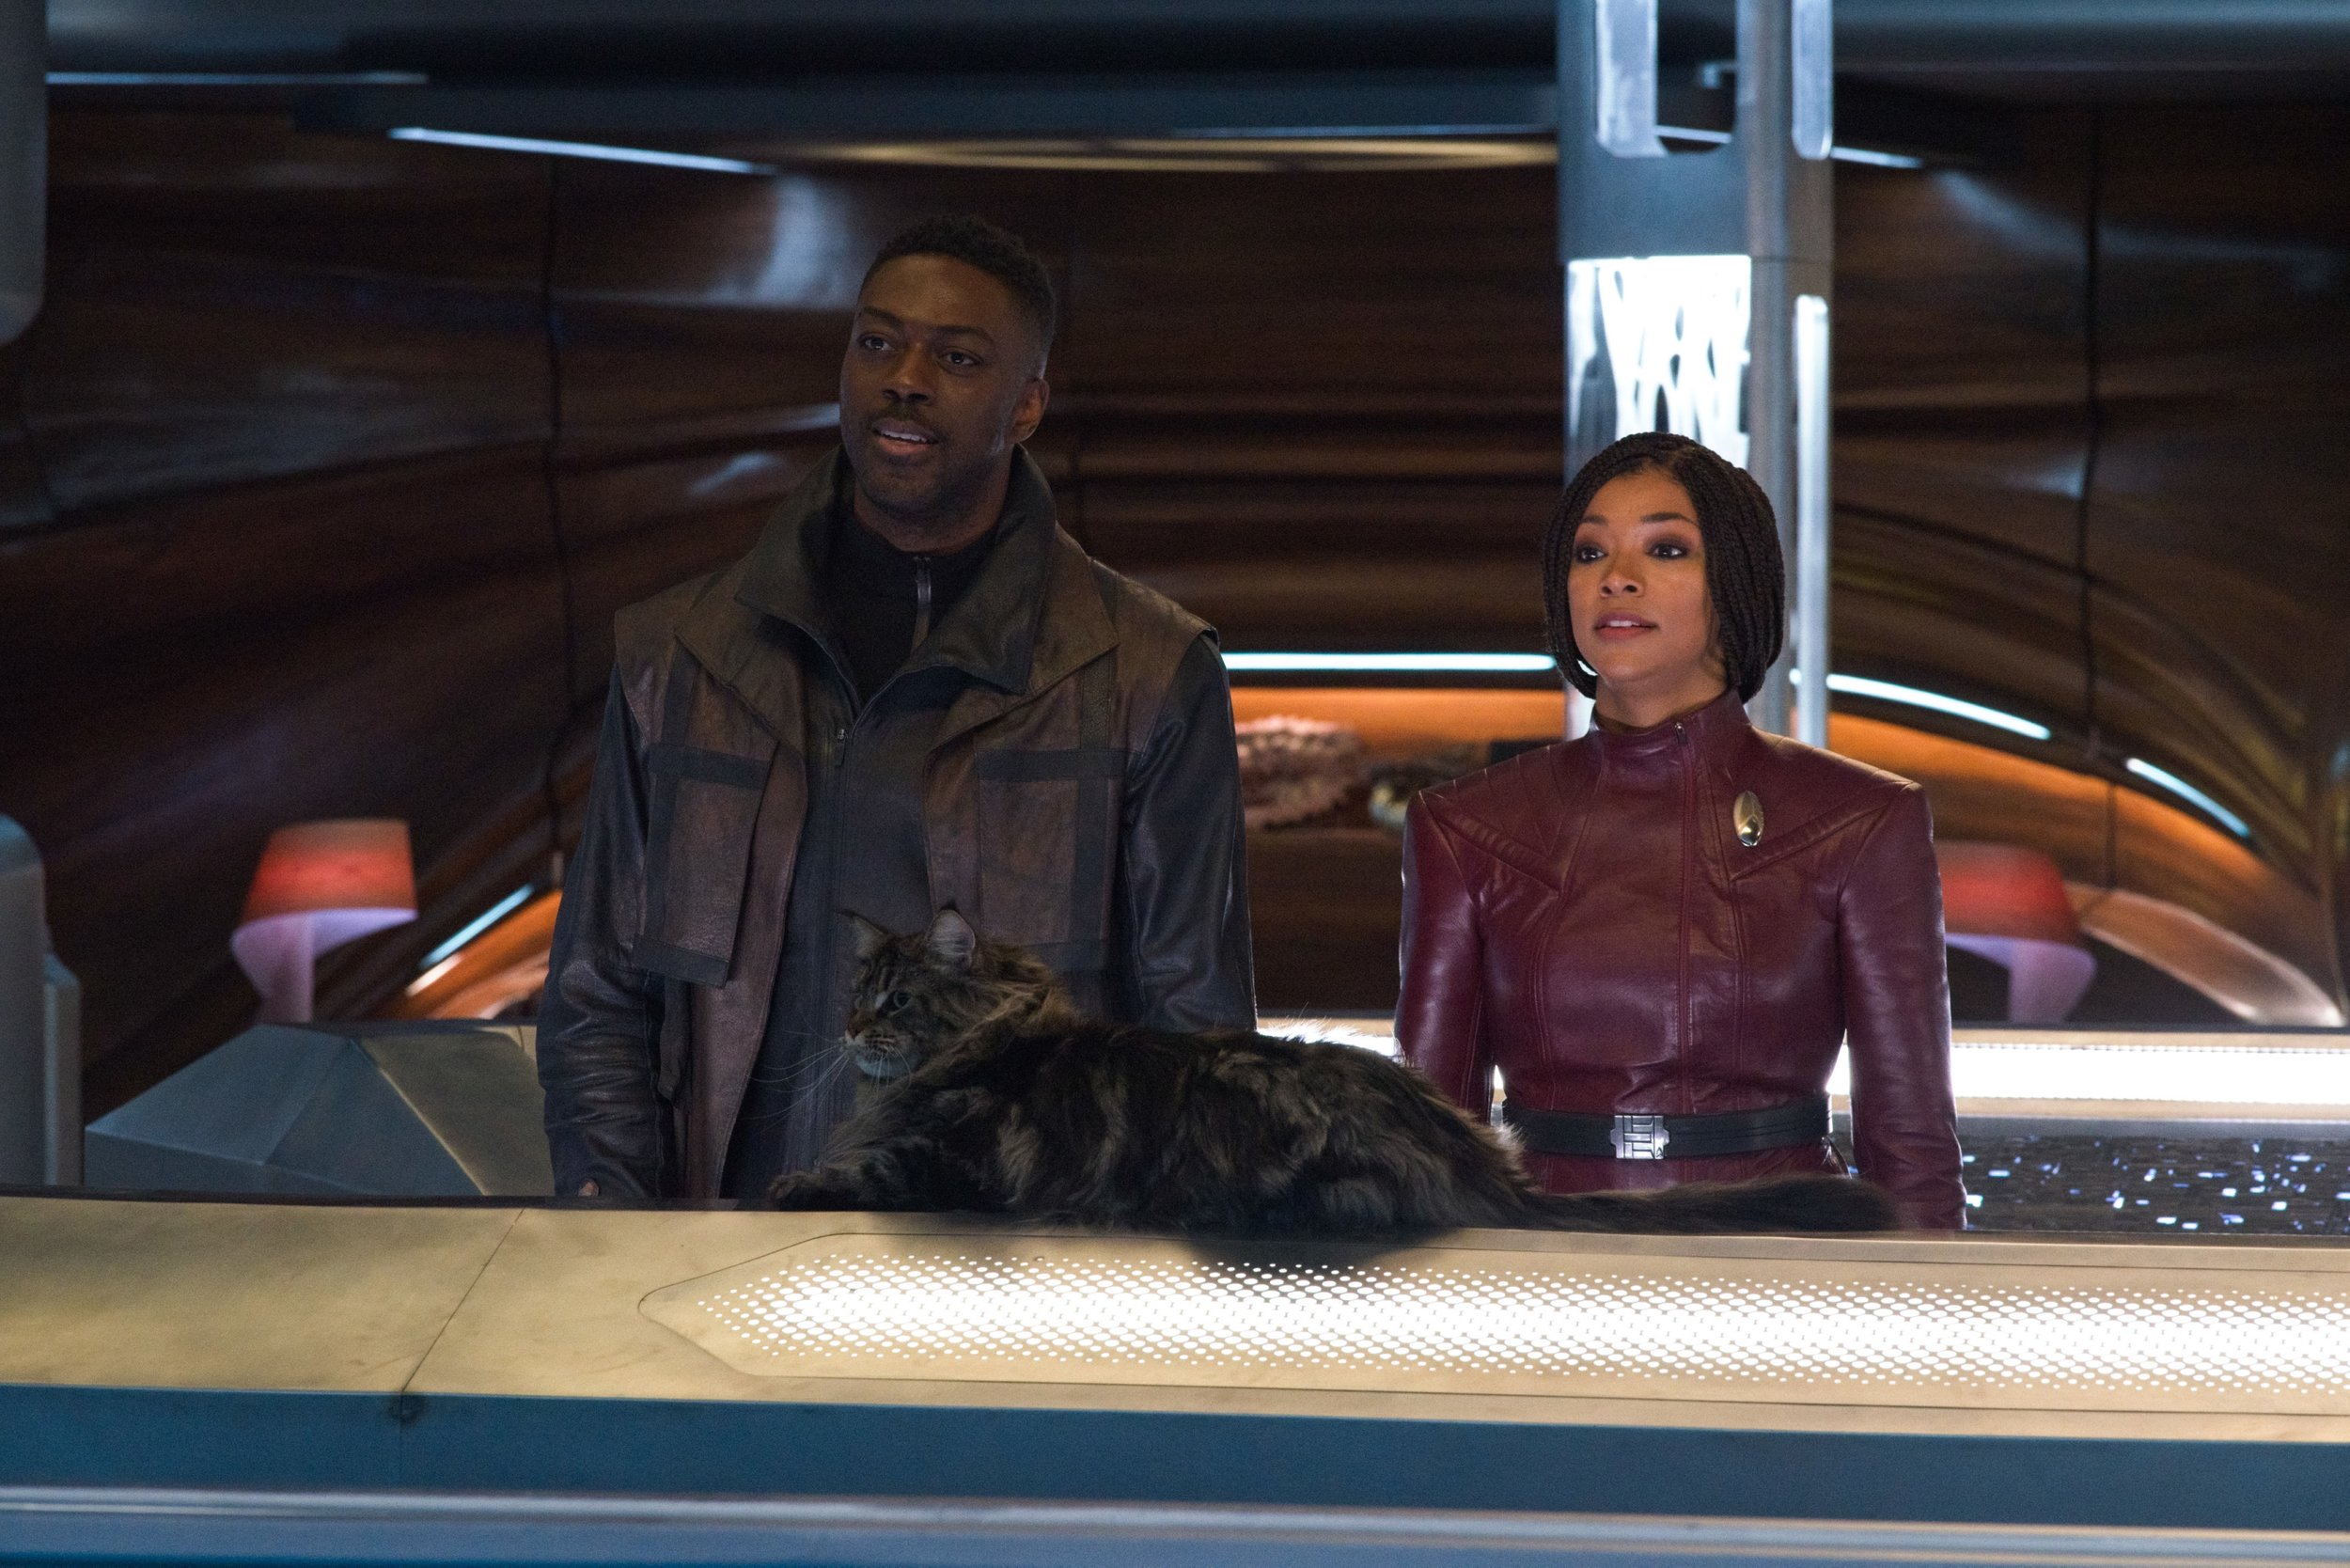   Pictured: David Ajala as Book and Sonequa Martin-Green as Michael Burnham of the Paramount+ original series STAR TREK: DISCOVERY. Photo Cr: Michael Gibson/ViacomCBS © 2021 ViacomCBS. All Rights Reserved.  